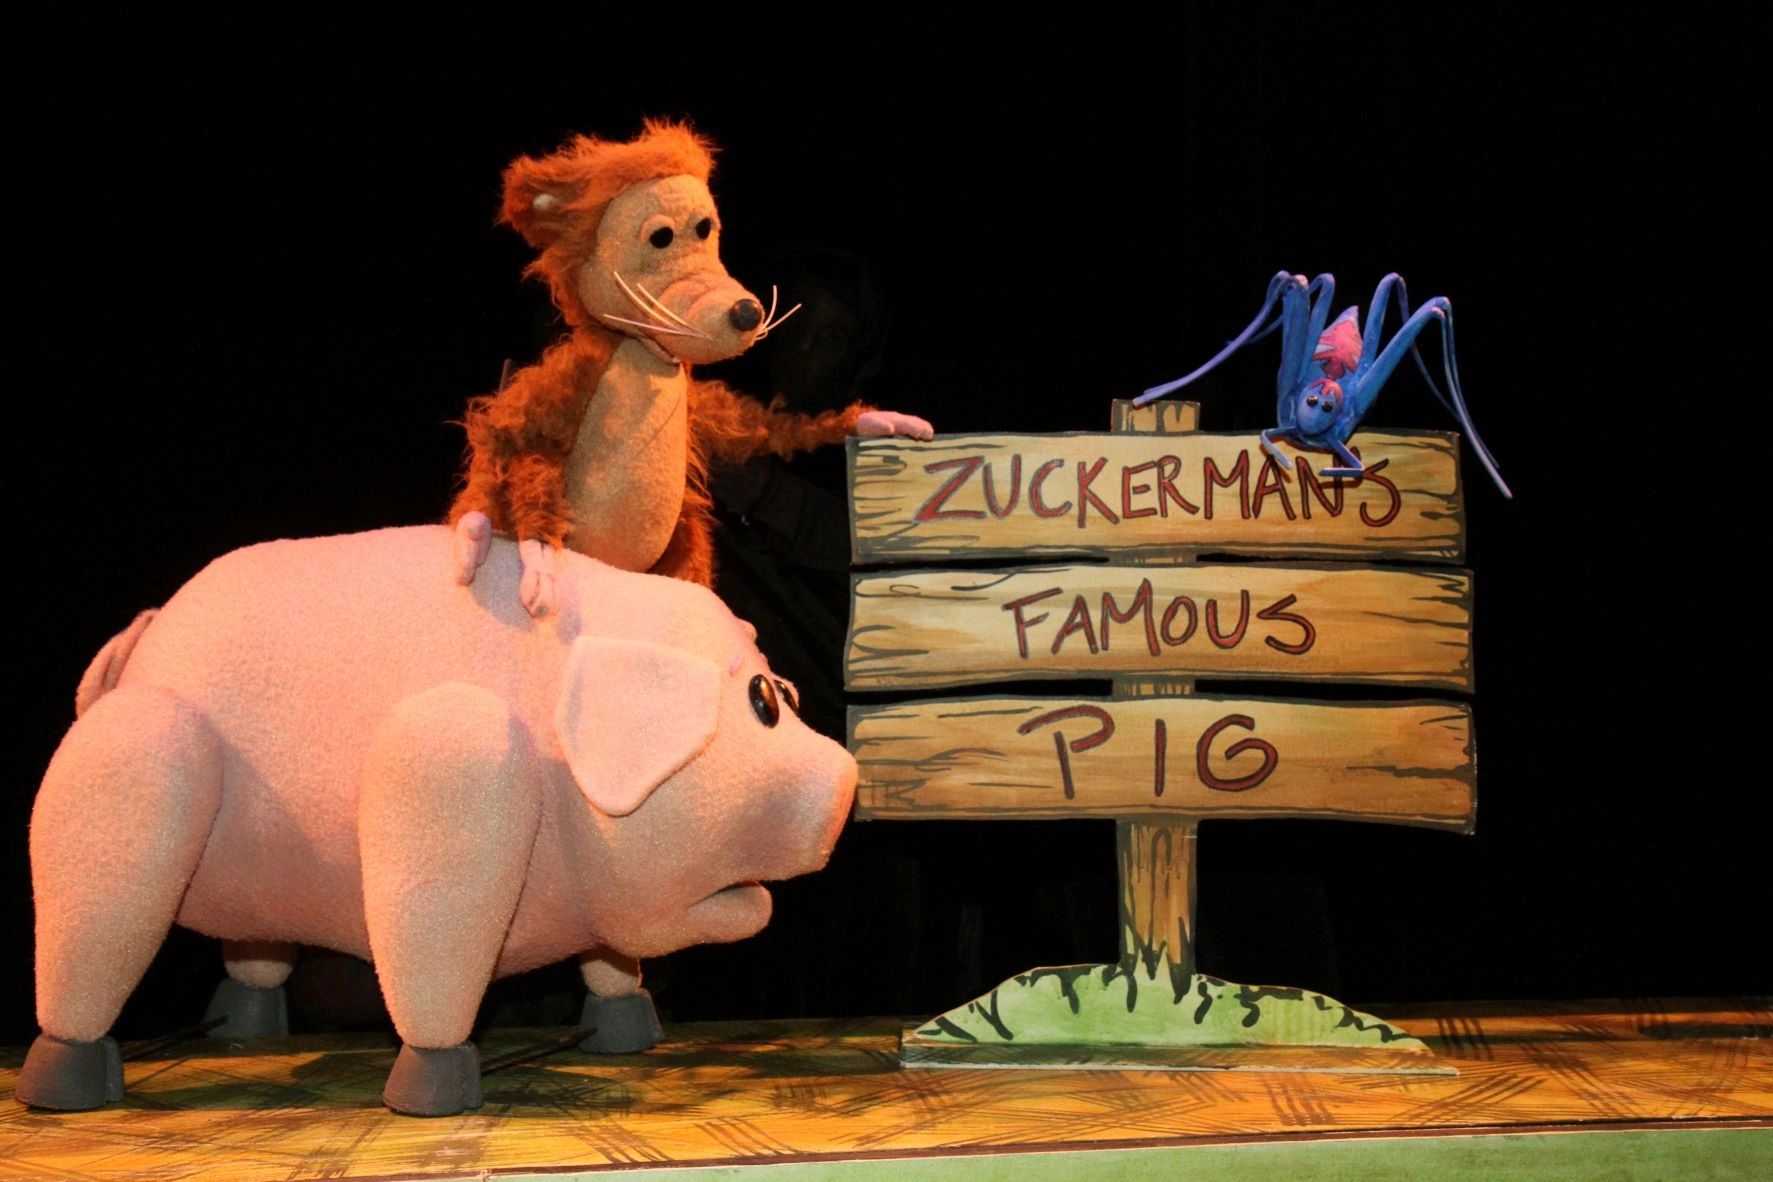 Center for Puppetry Arts • Puppet shows, museum, field trips, and events!